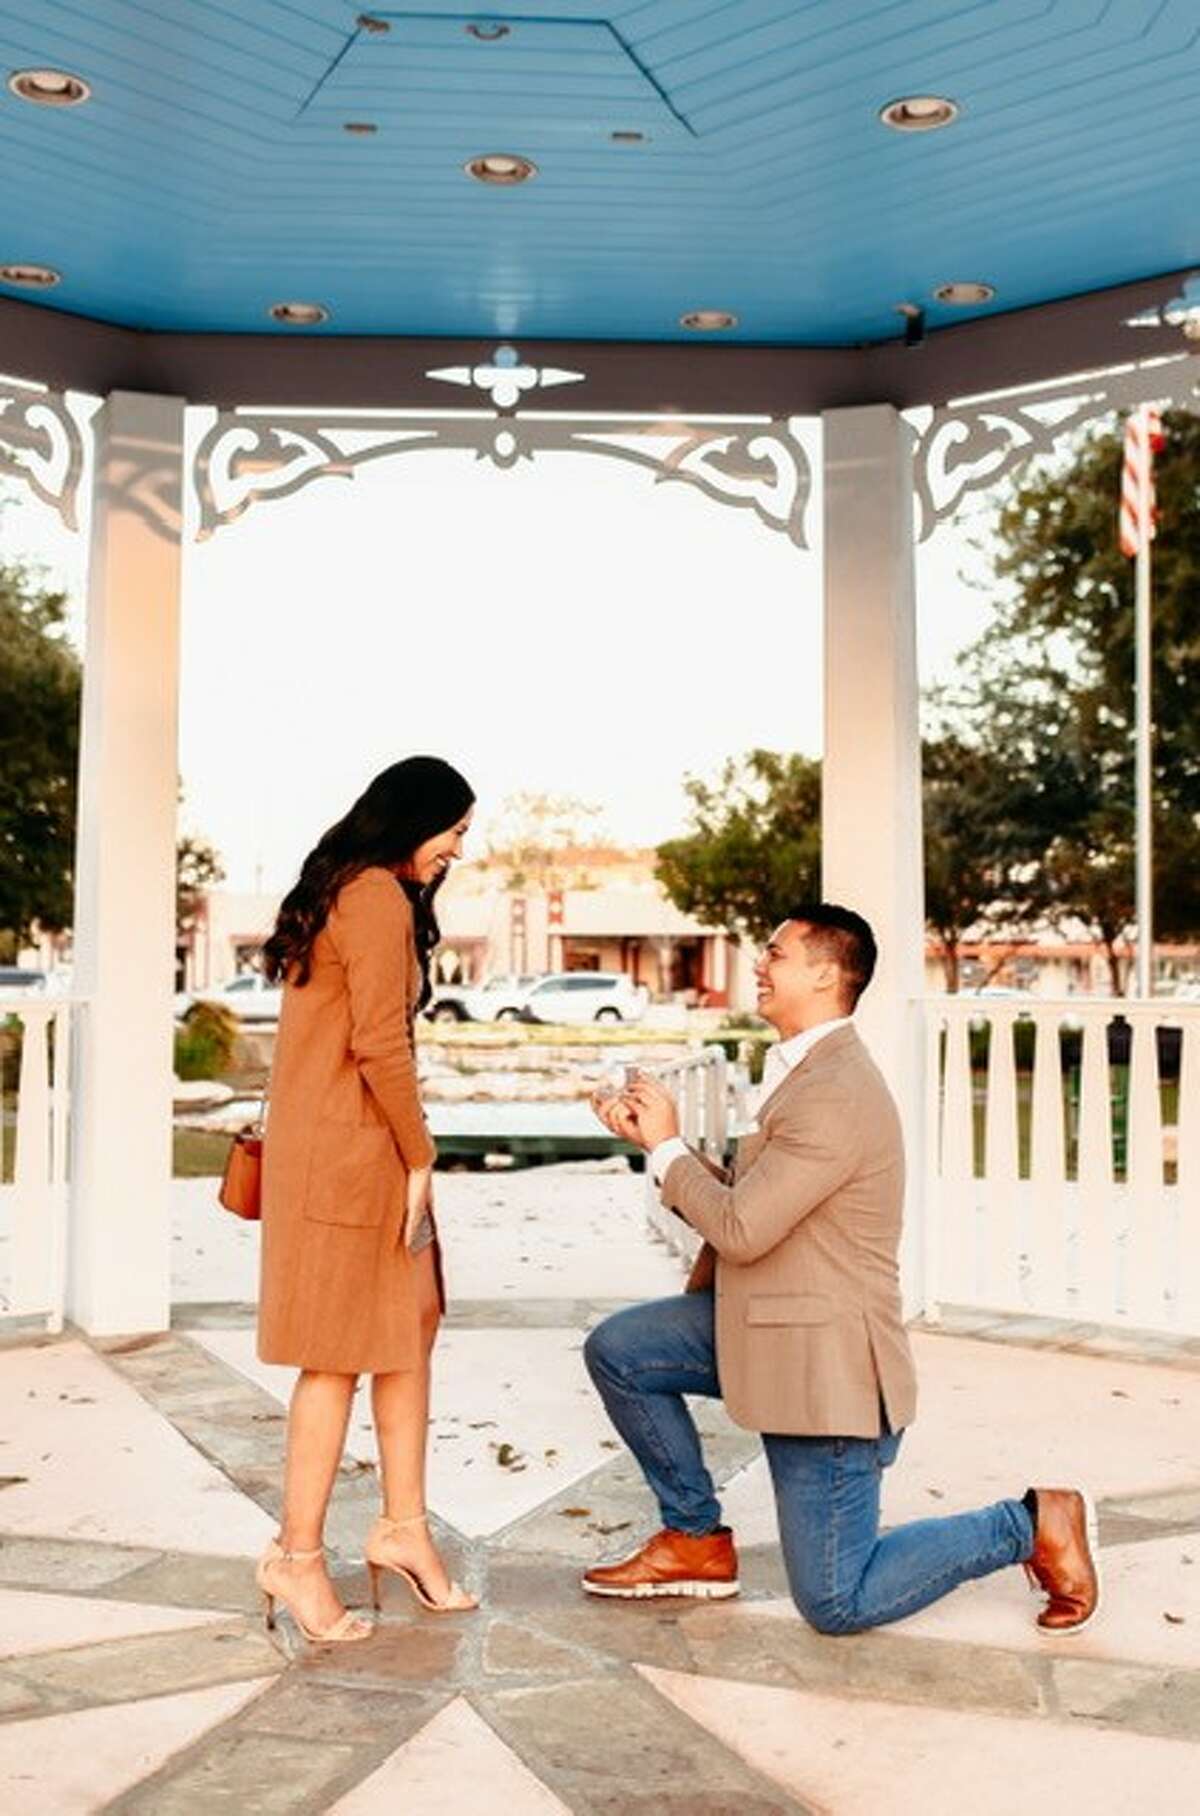 KENS 5 meteorologist Ryan Shoptaugh proposes to fiance.